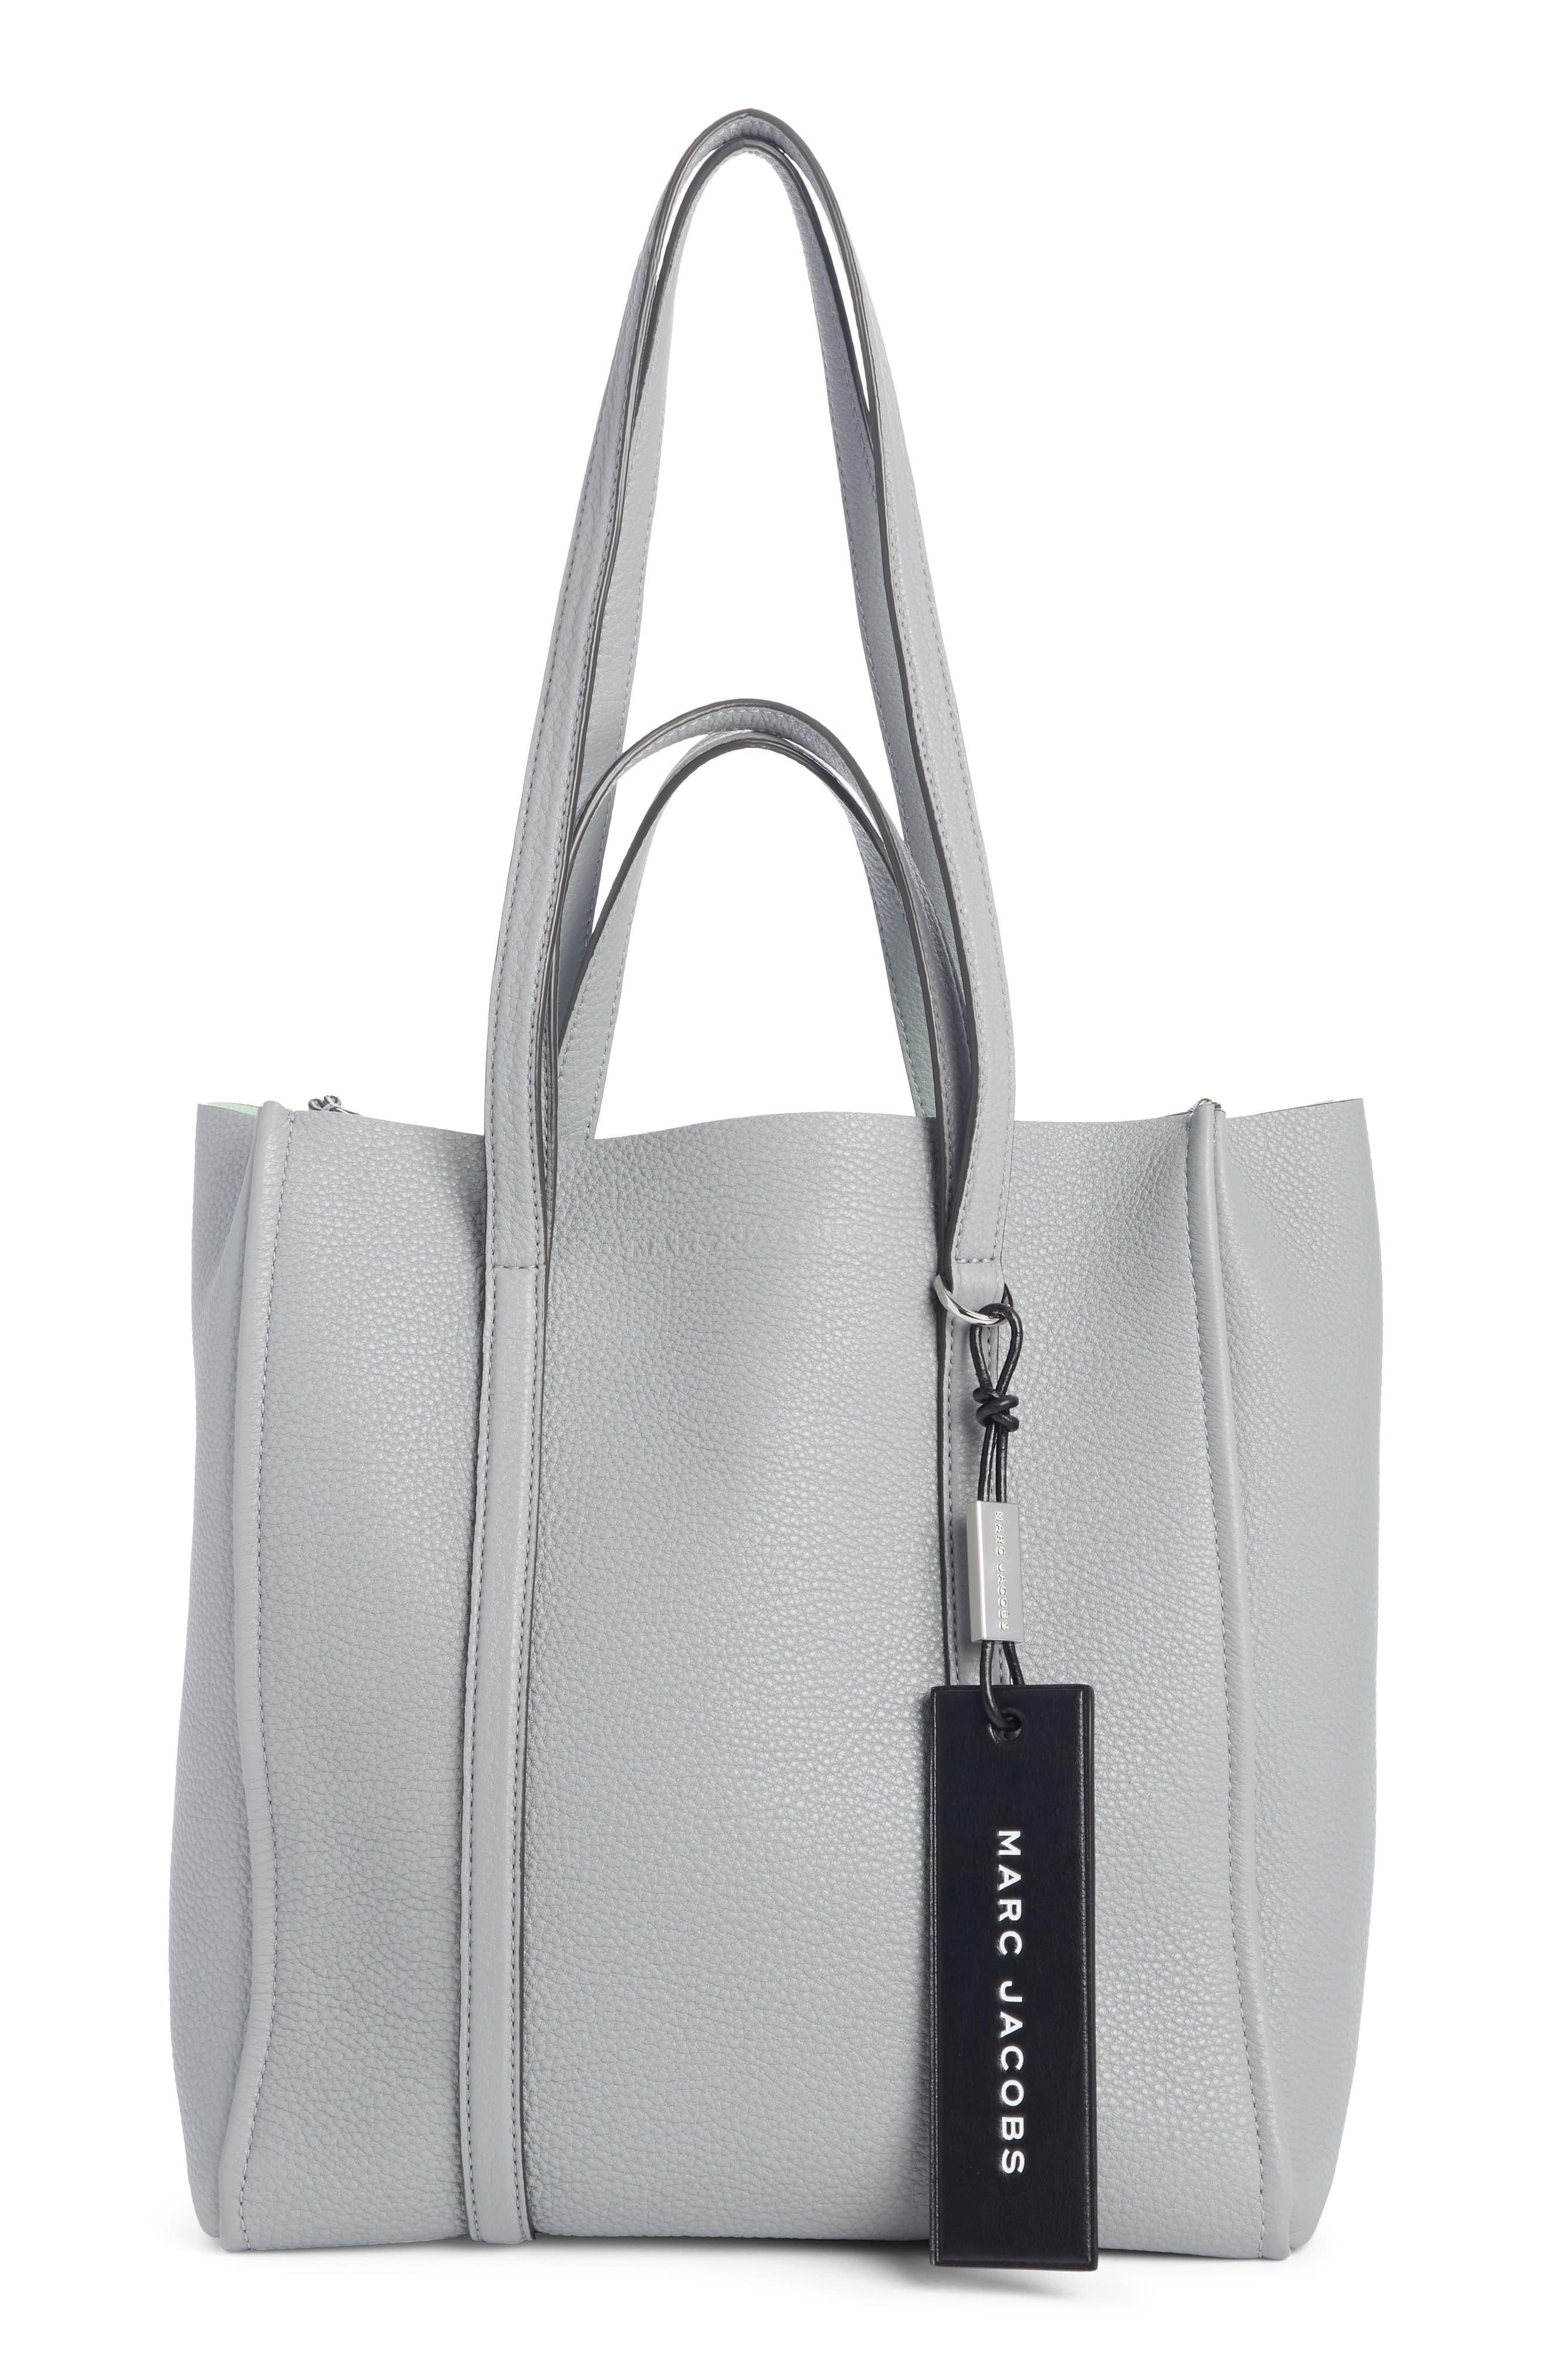 Marc Jacobs The Tag 27 Leather Tote in Gray - Lyst